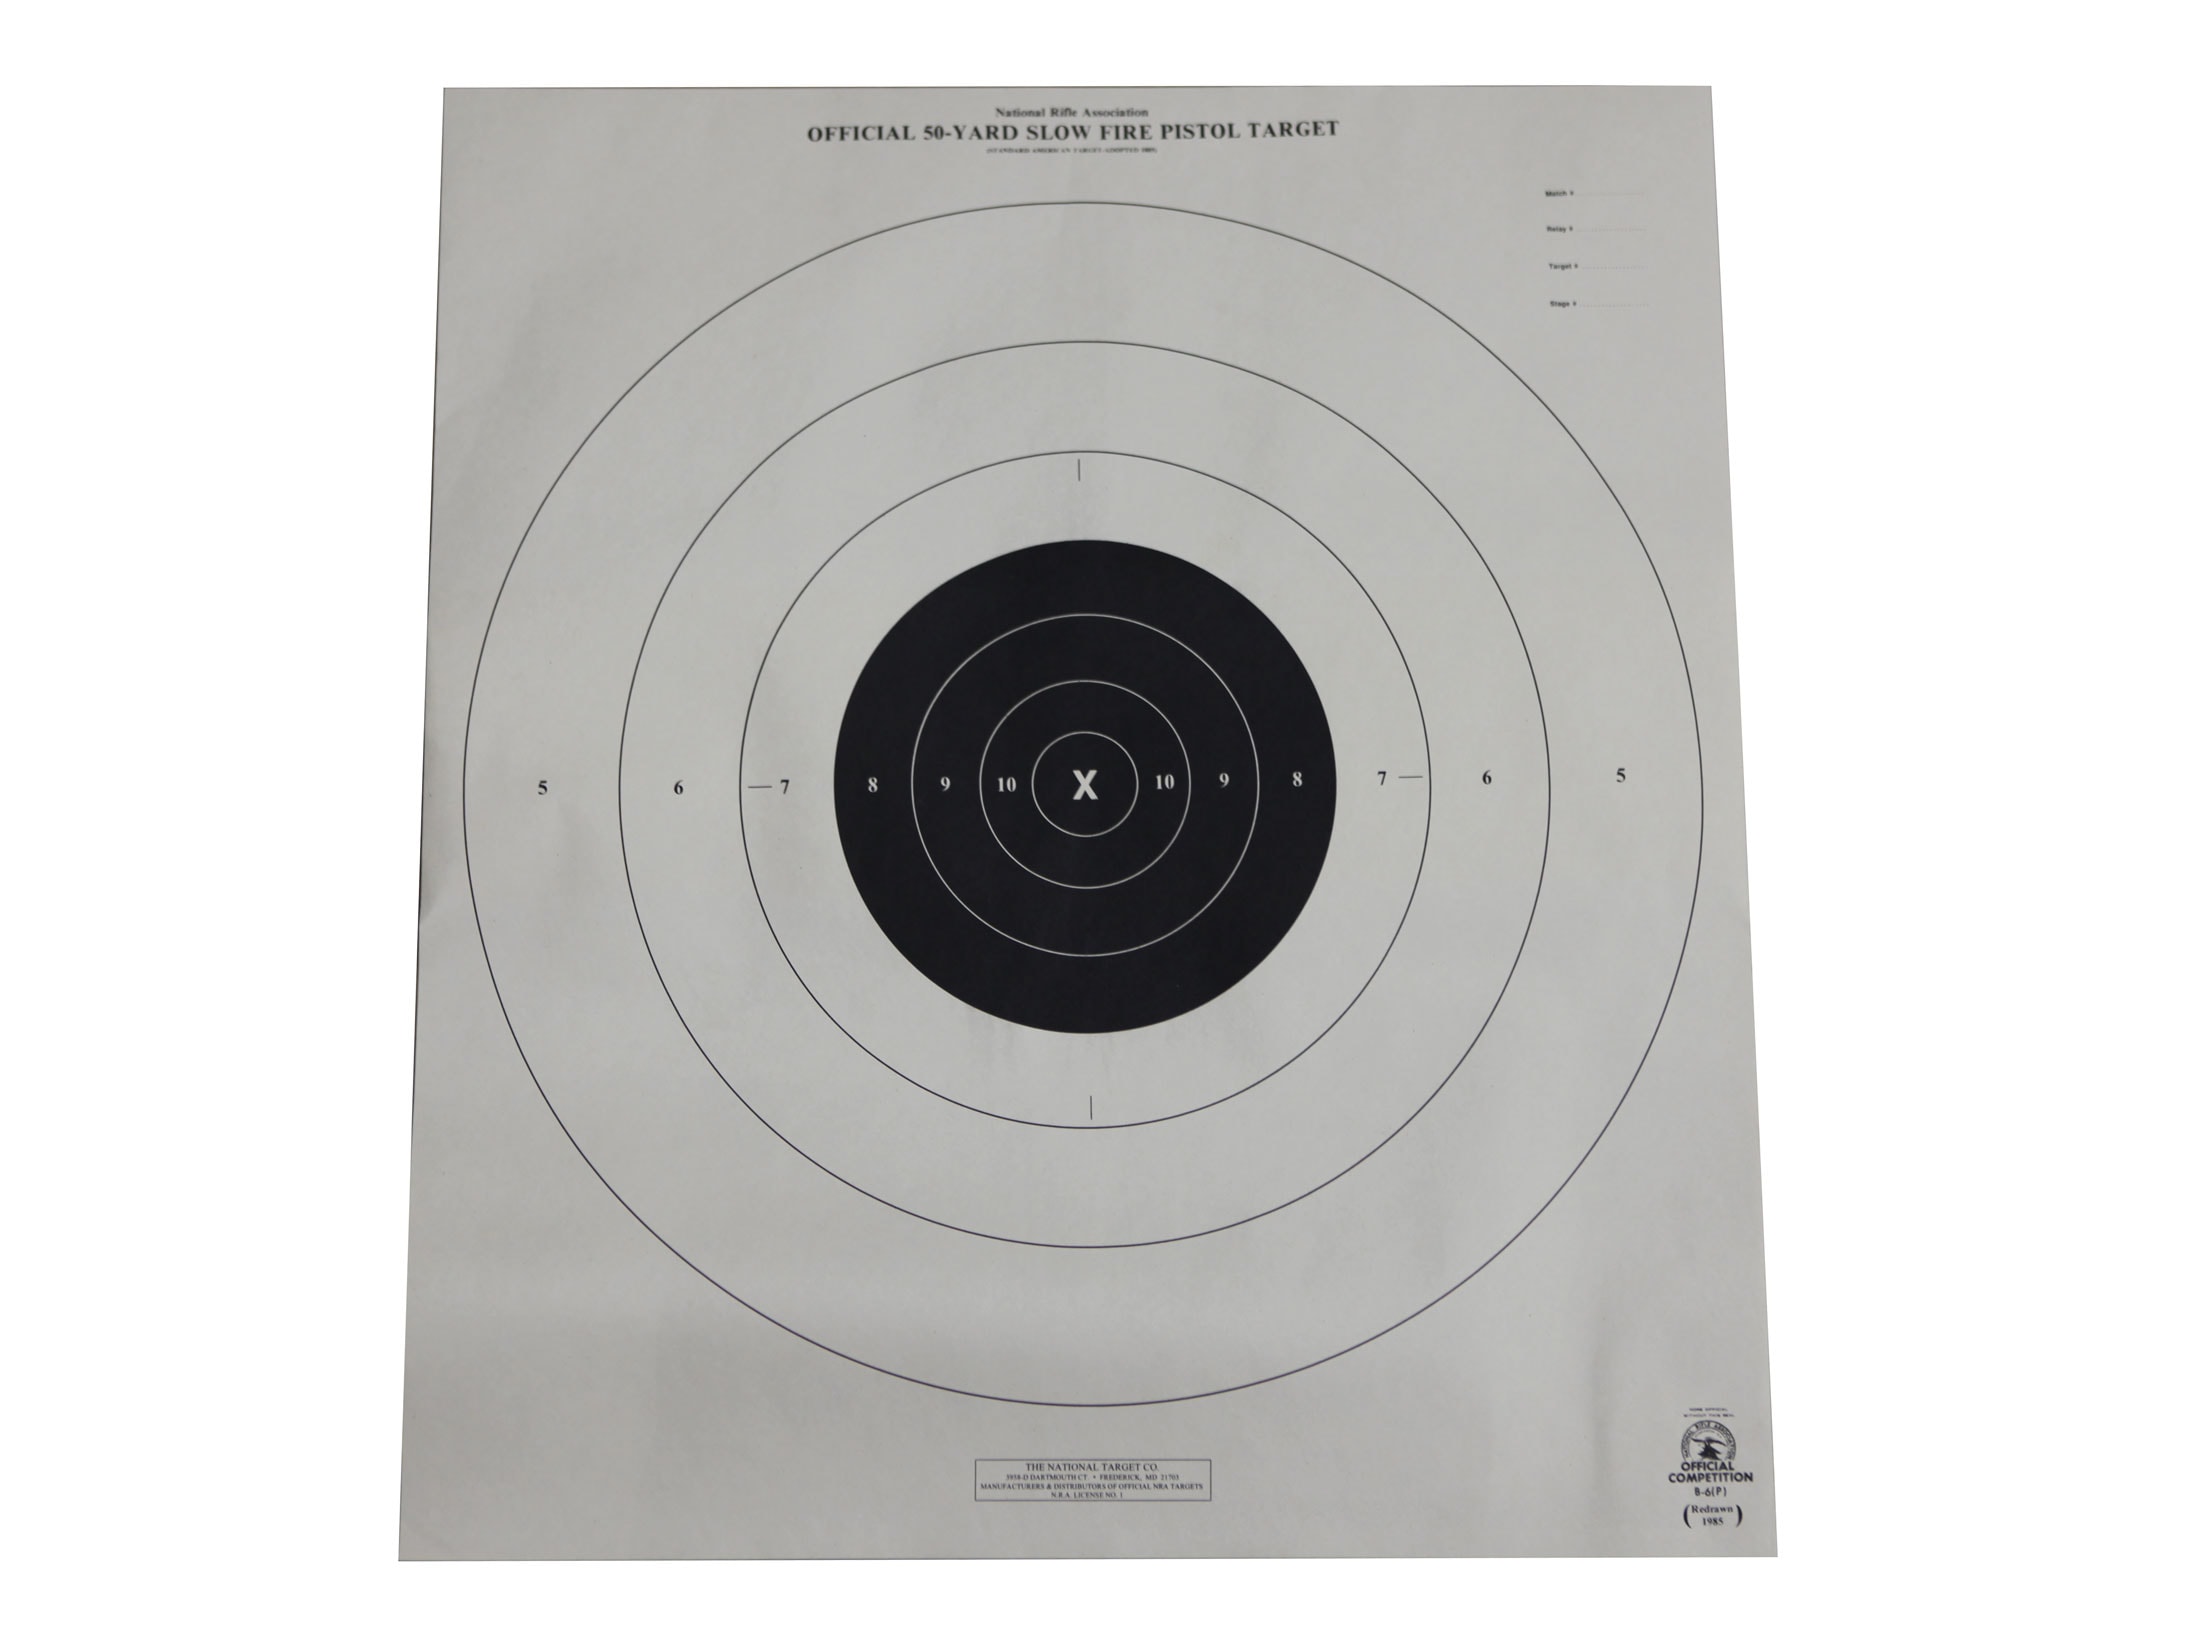 6 targets & 24 centers on Tag 50-Yard Slow Fire Pistol B6 Official NRA B-6 